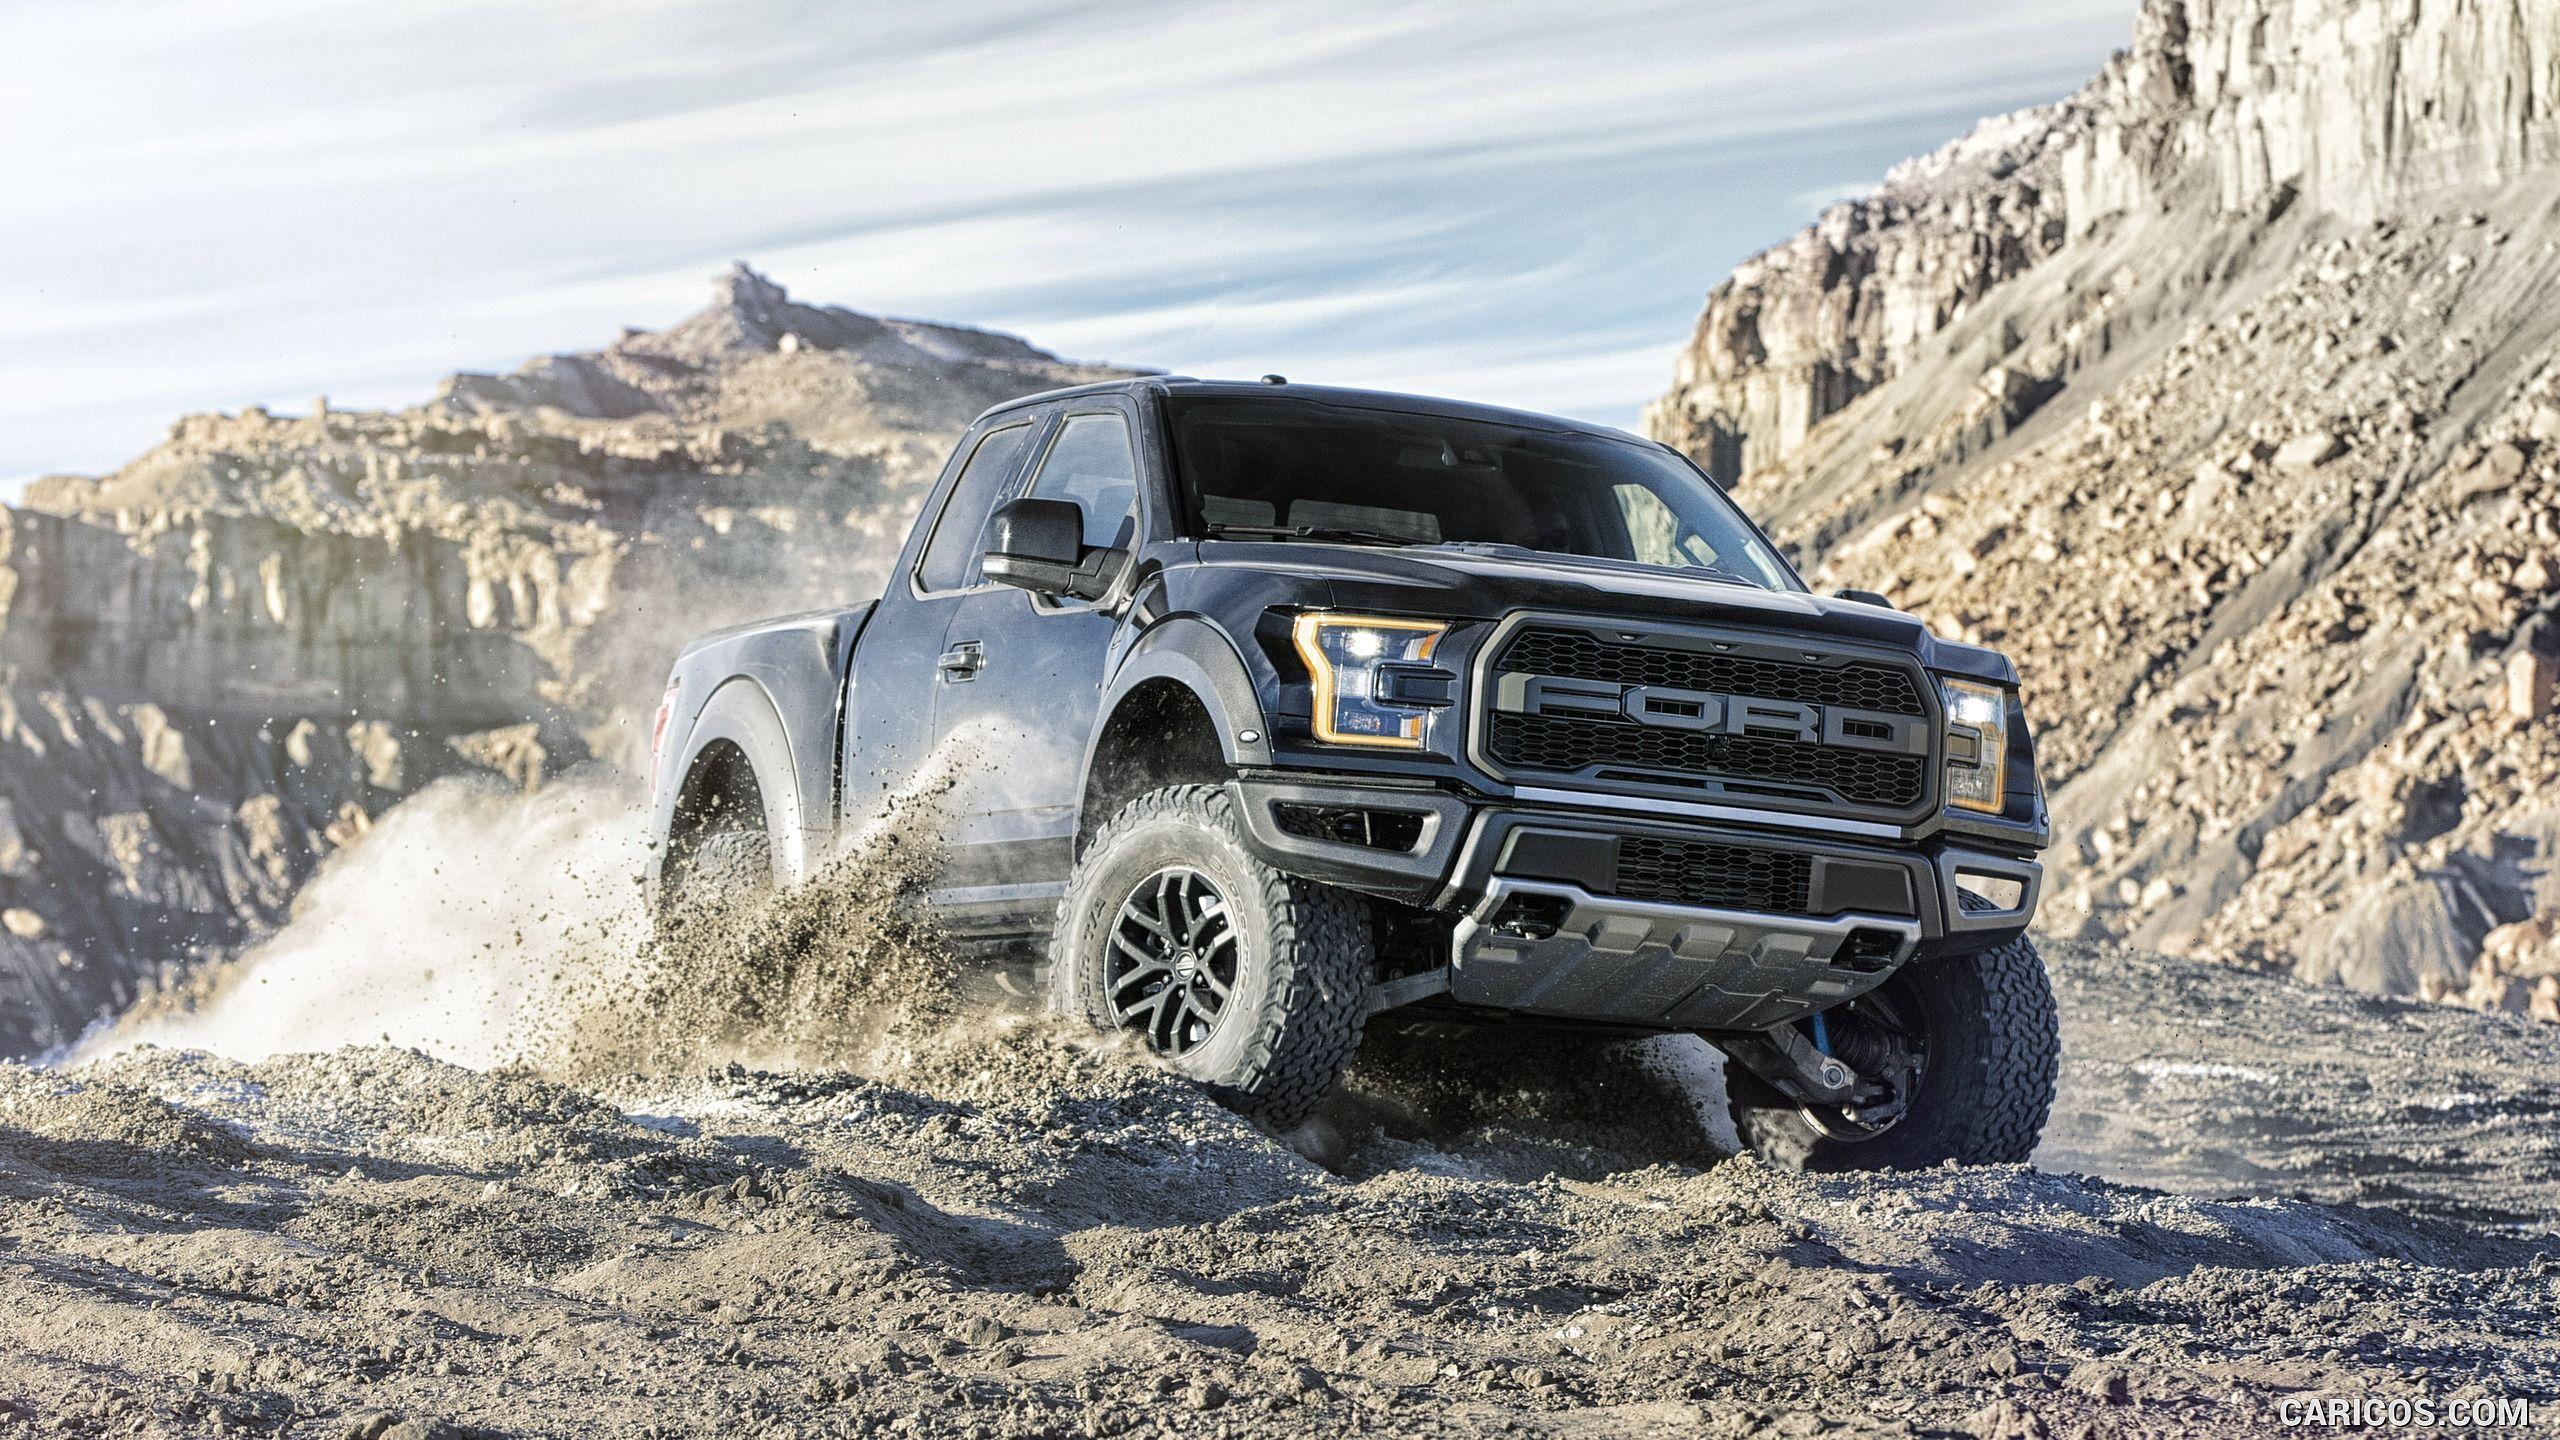 Ford F 150 Raptor Wallpaper. Things To Fill The Garage